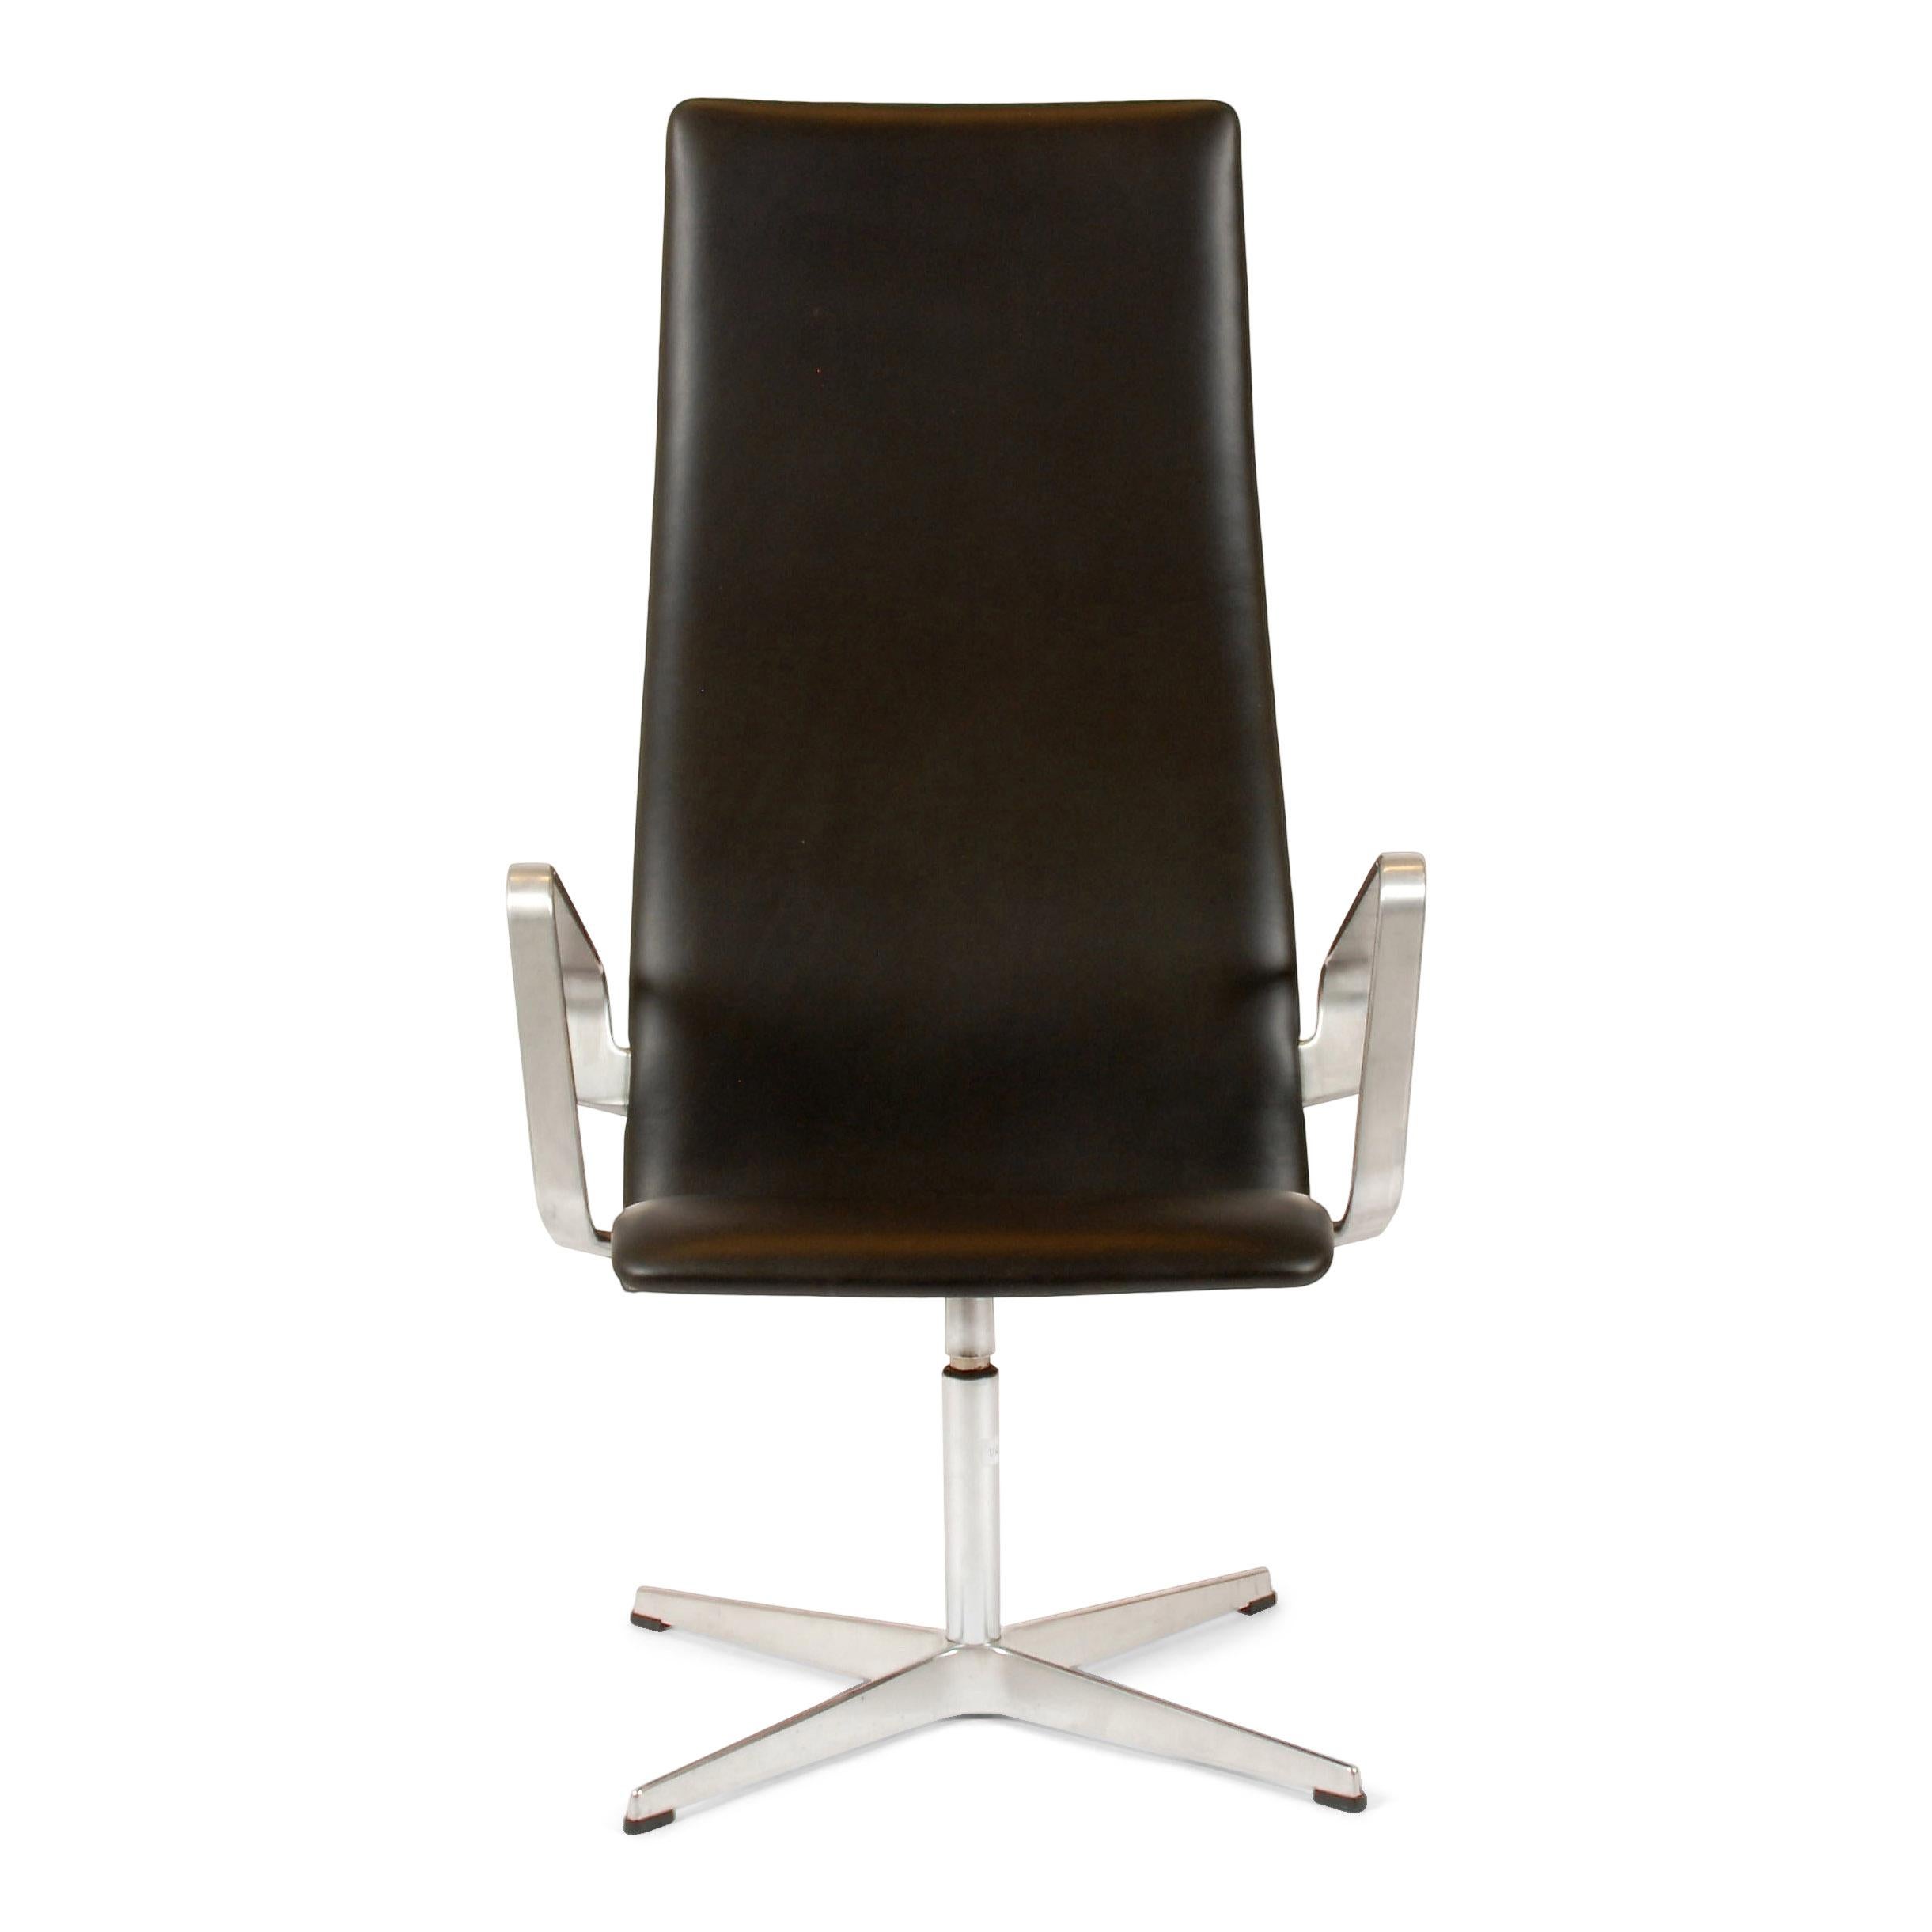 Arne Jacobsen Fritz Hansen midcentury design Oxford lounge chair black leather.
Arne Jacobsen (1902-1971)

Lounge chair model Oxford with ottoman. Aluminium revolving cross bases. Reupholstered in anilin Black Leather. Manufactured by Fritz